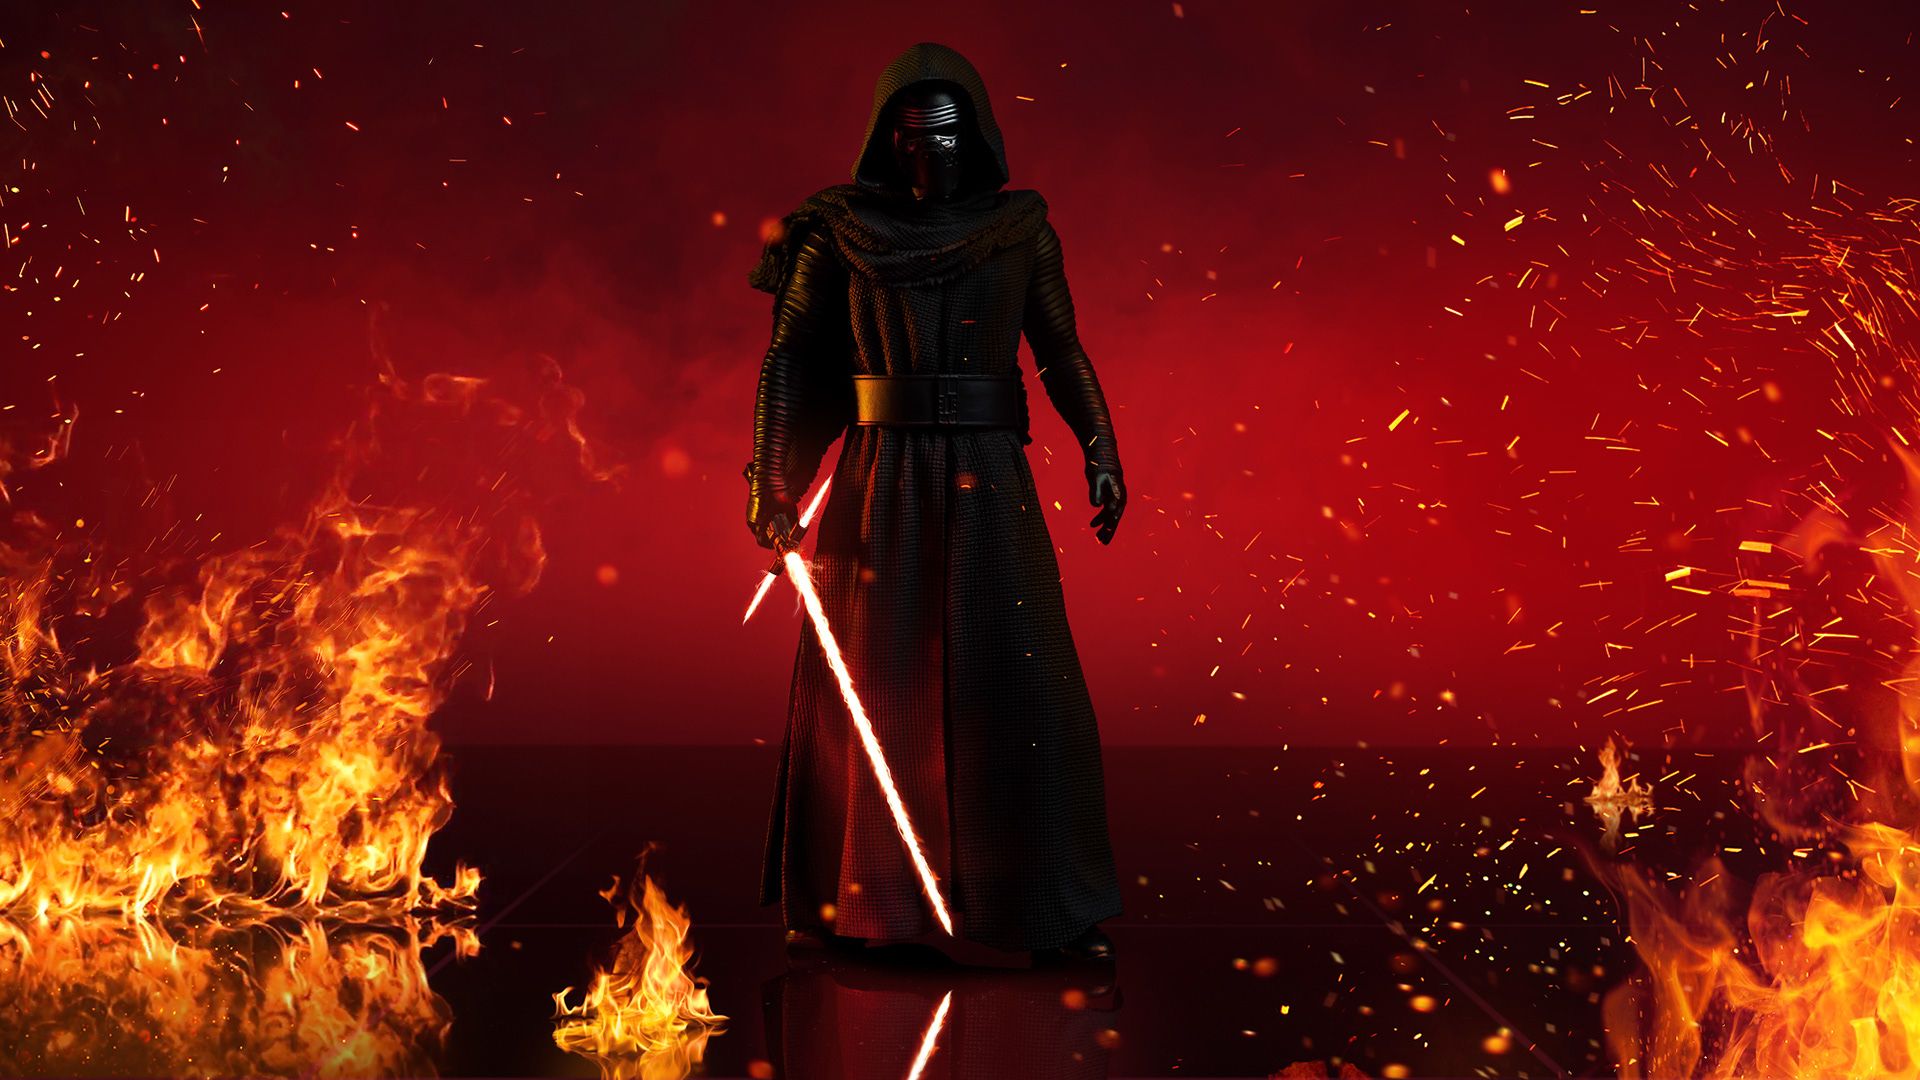 Kylo Ren With Lightsaber In Star Wars Macbook Pro Retina Wallpaper, HD Movies 4K Wallpaper, Image, Photo and Background